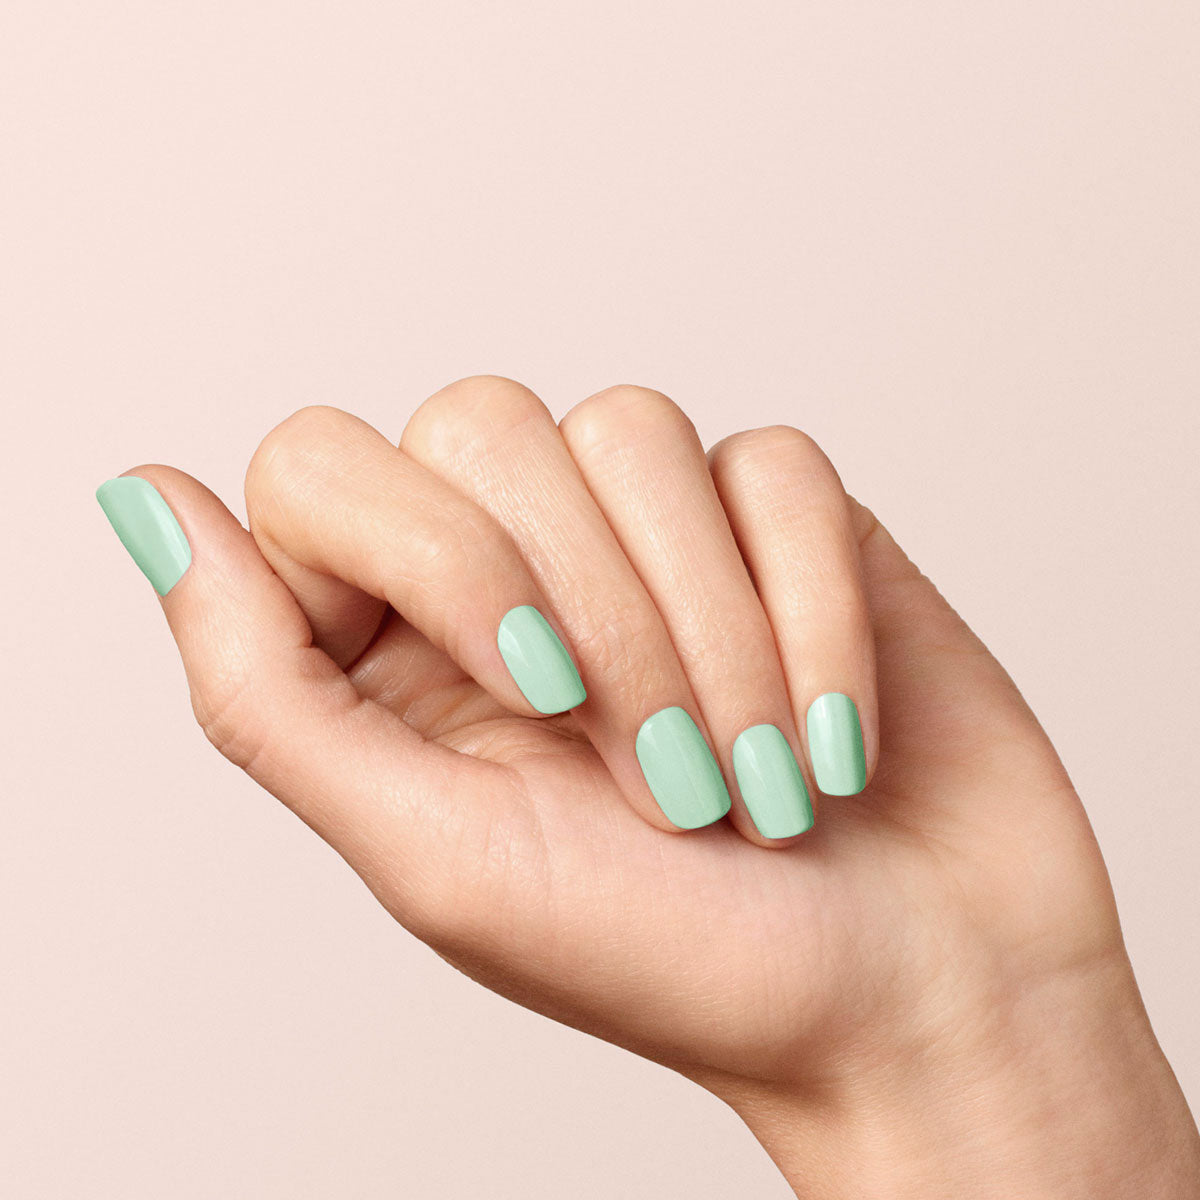 Barry M Spring Green Nail Paint - Imagination In Colour